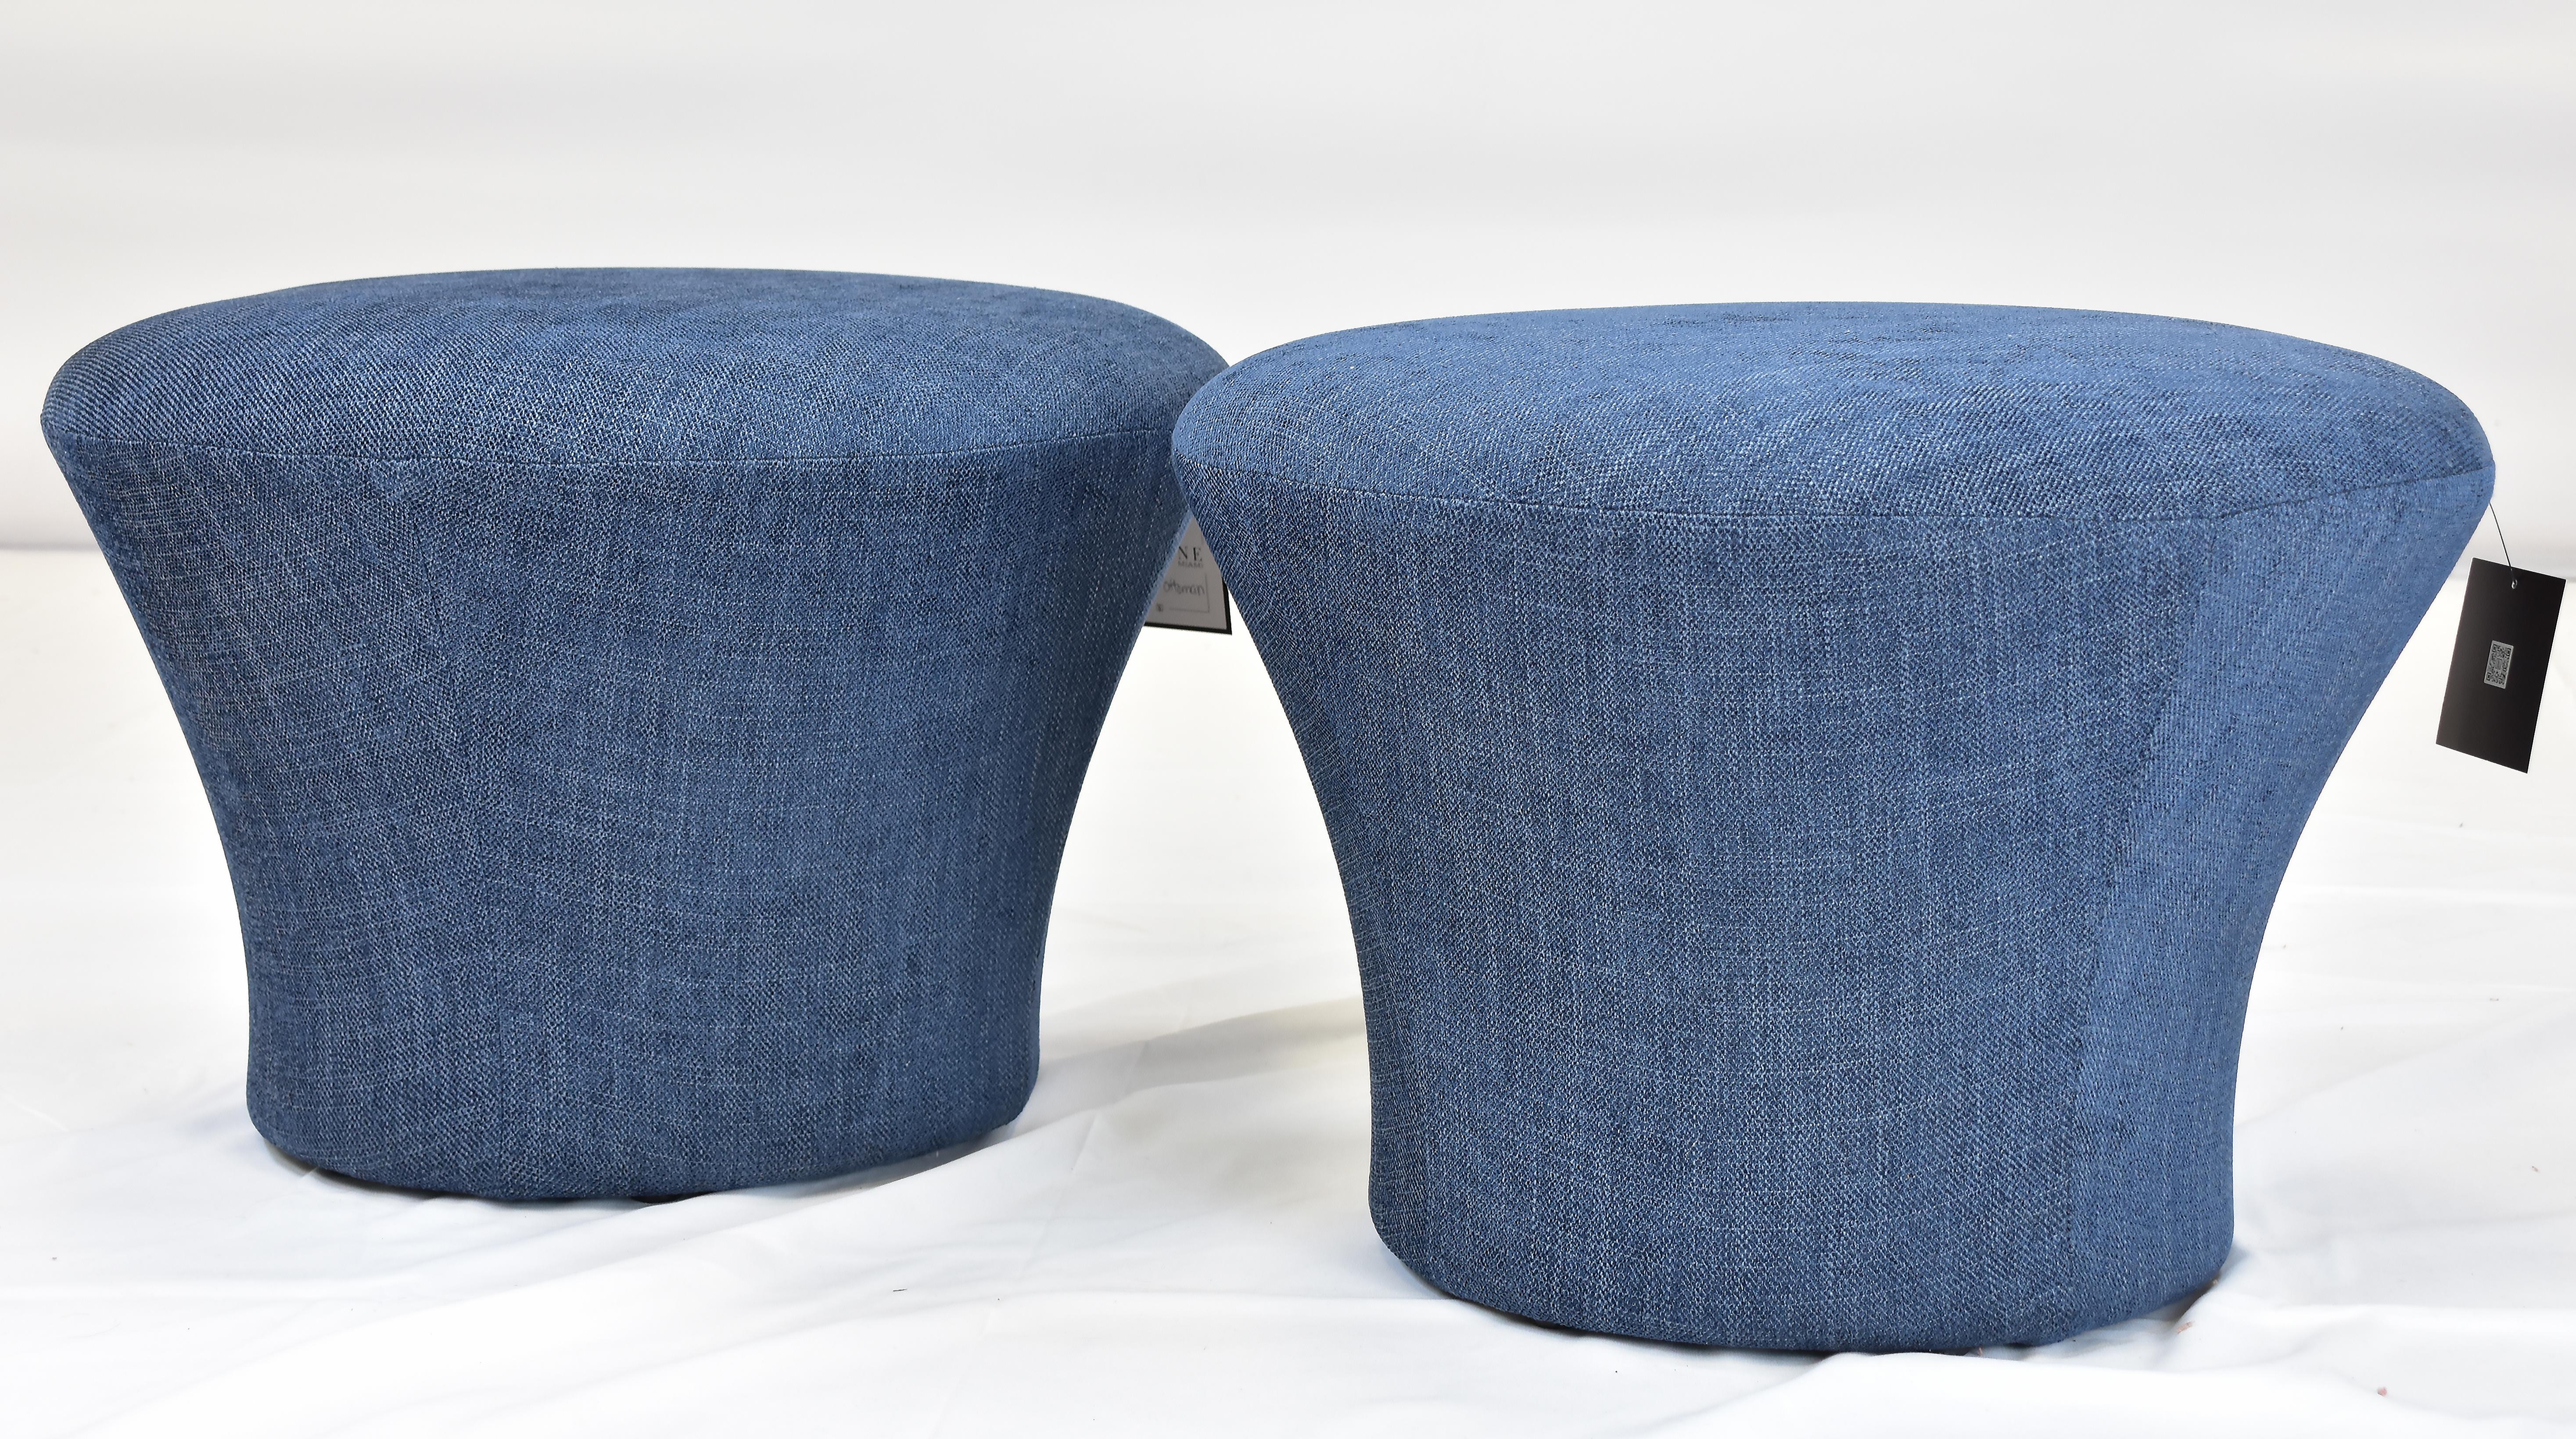 Le Jeune Upholstery Indigo Ottoman Showroom Model, Per Item

Offered for sale individually are Le jeune Upholstery INDIGO O5/06 .923	Ottomans that are showroom models.	 This is a very classic mushroom-styled ottoman with a reduced scale that can be